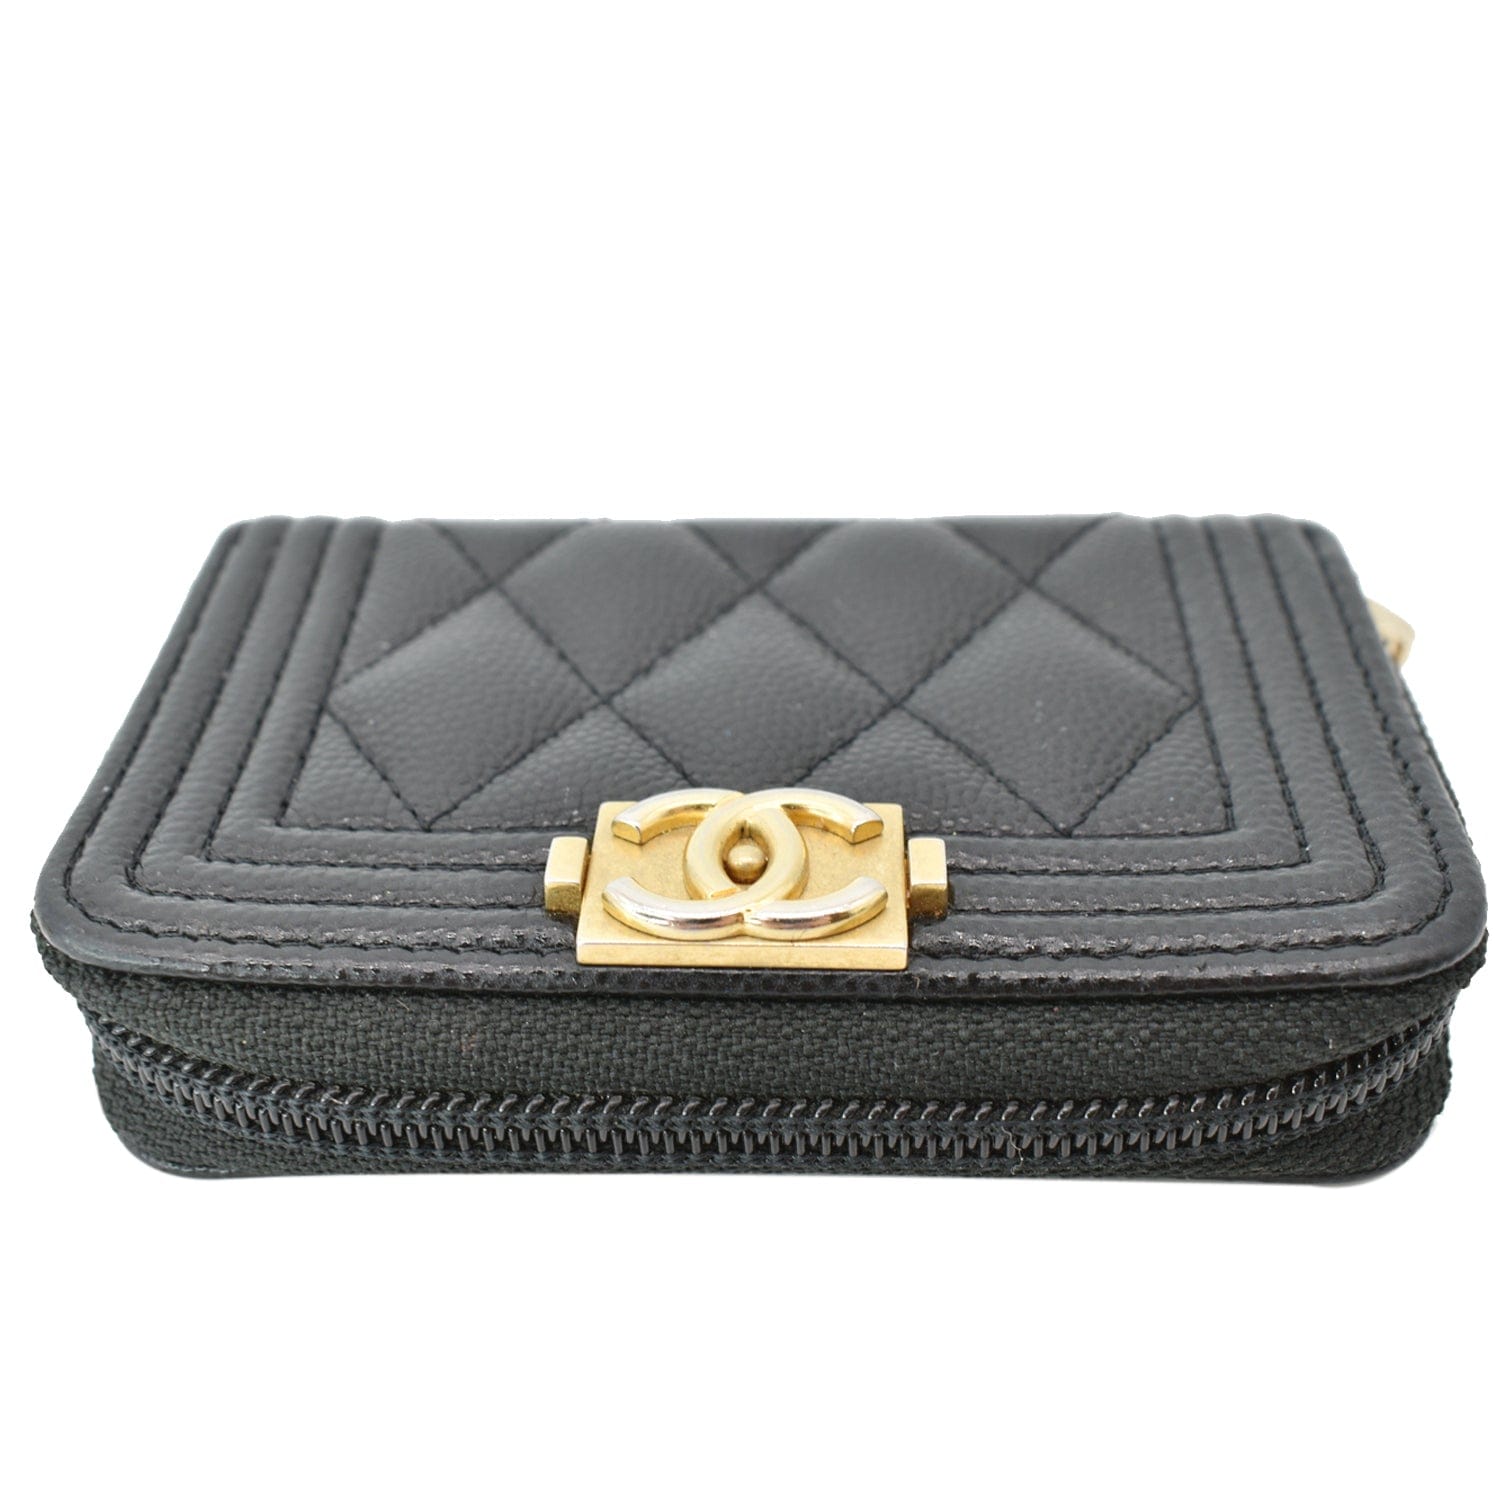 chanel black and white clutch bag